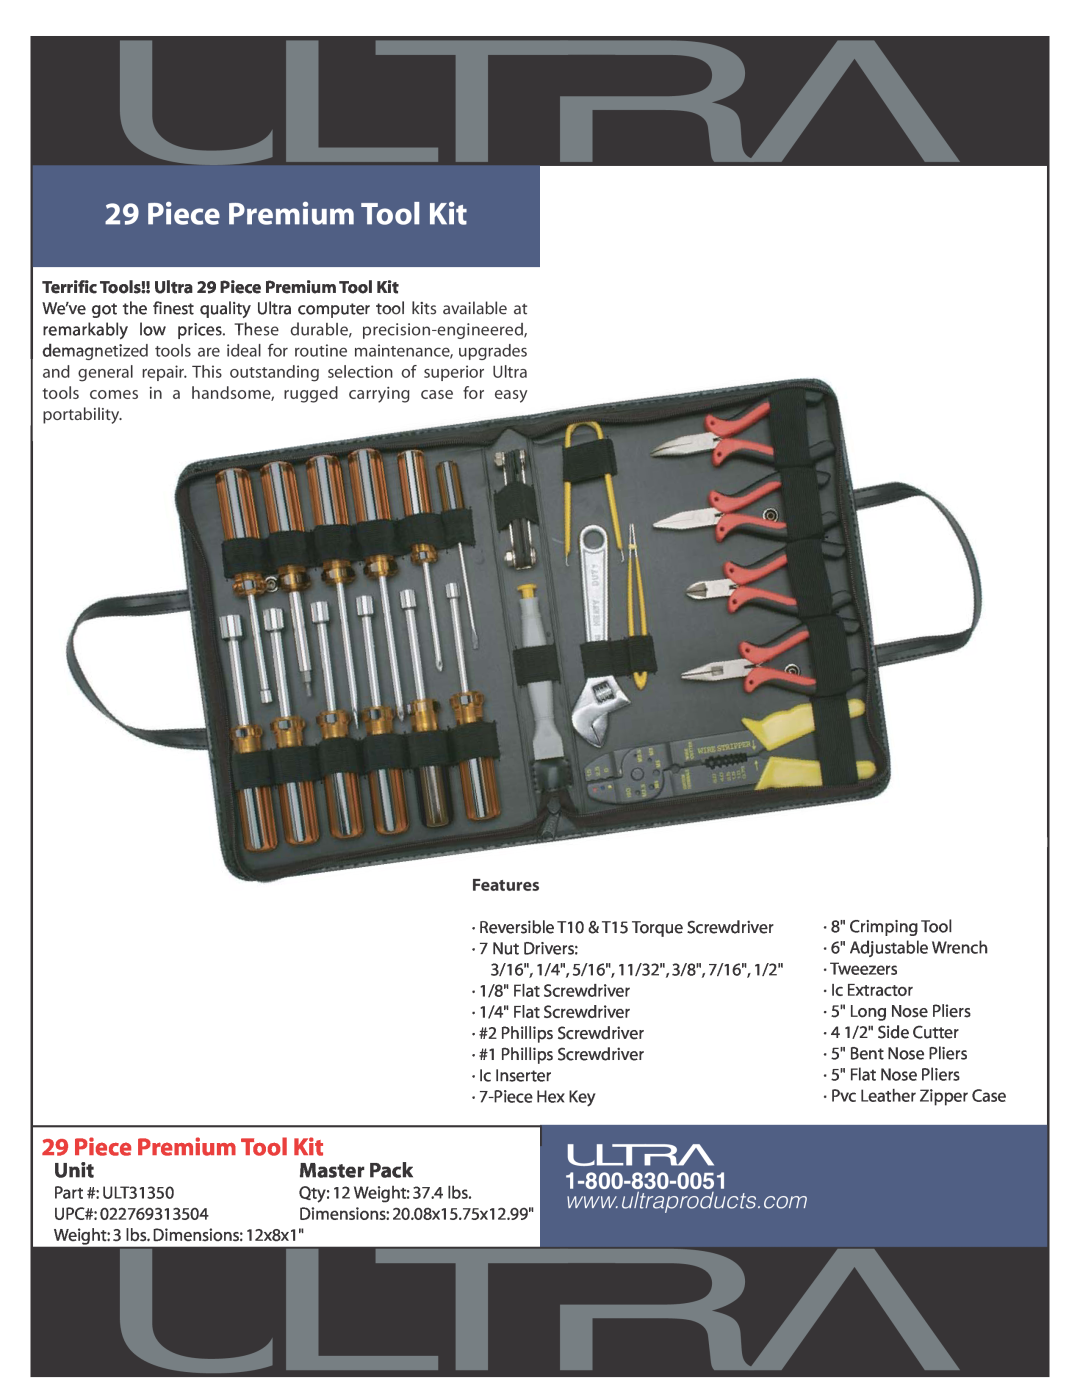 Ultra Products ULT31350 dimensions Piece Premium Tool Kit, Unit, Master Pack, Features 